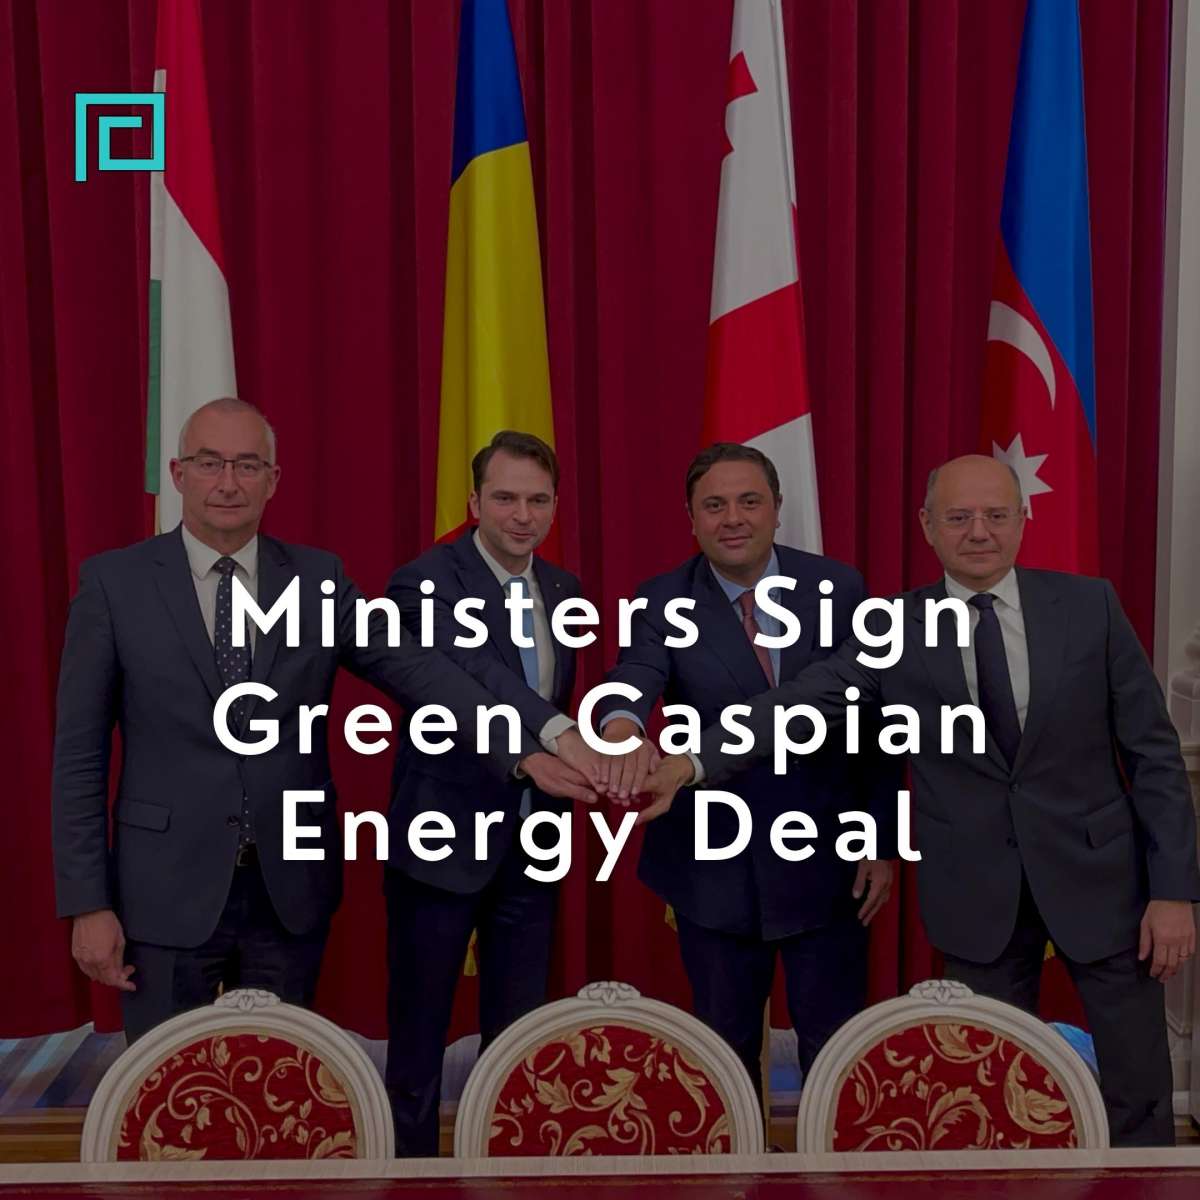 Ministers Sign Green Caspian Energy Deal